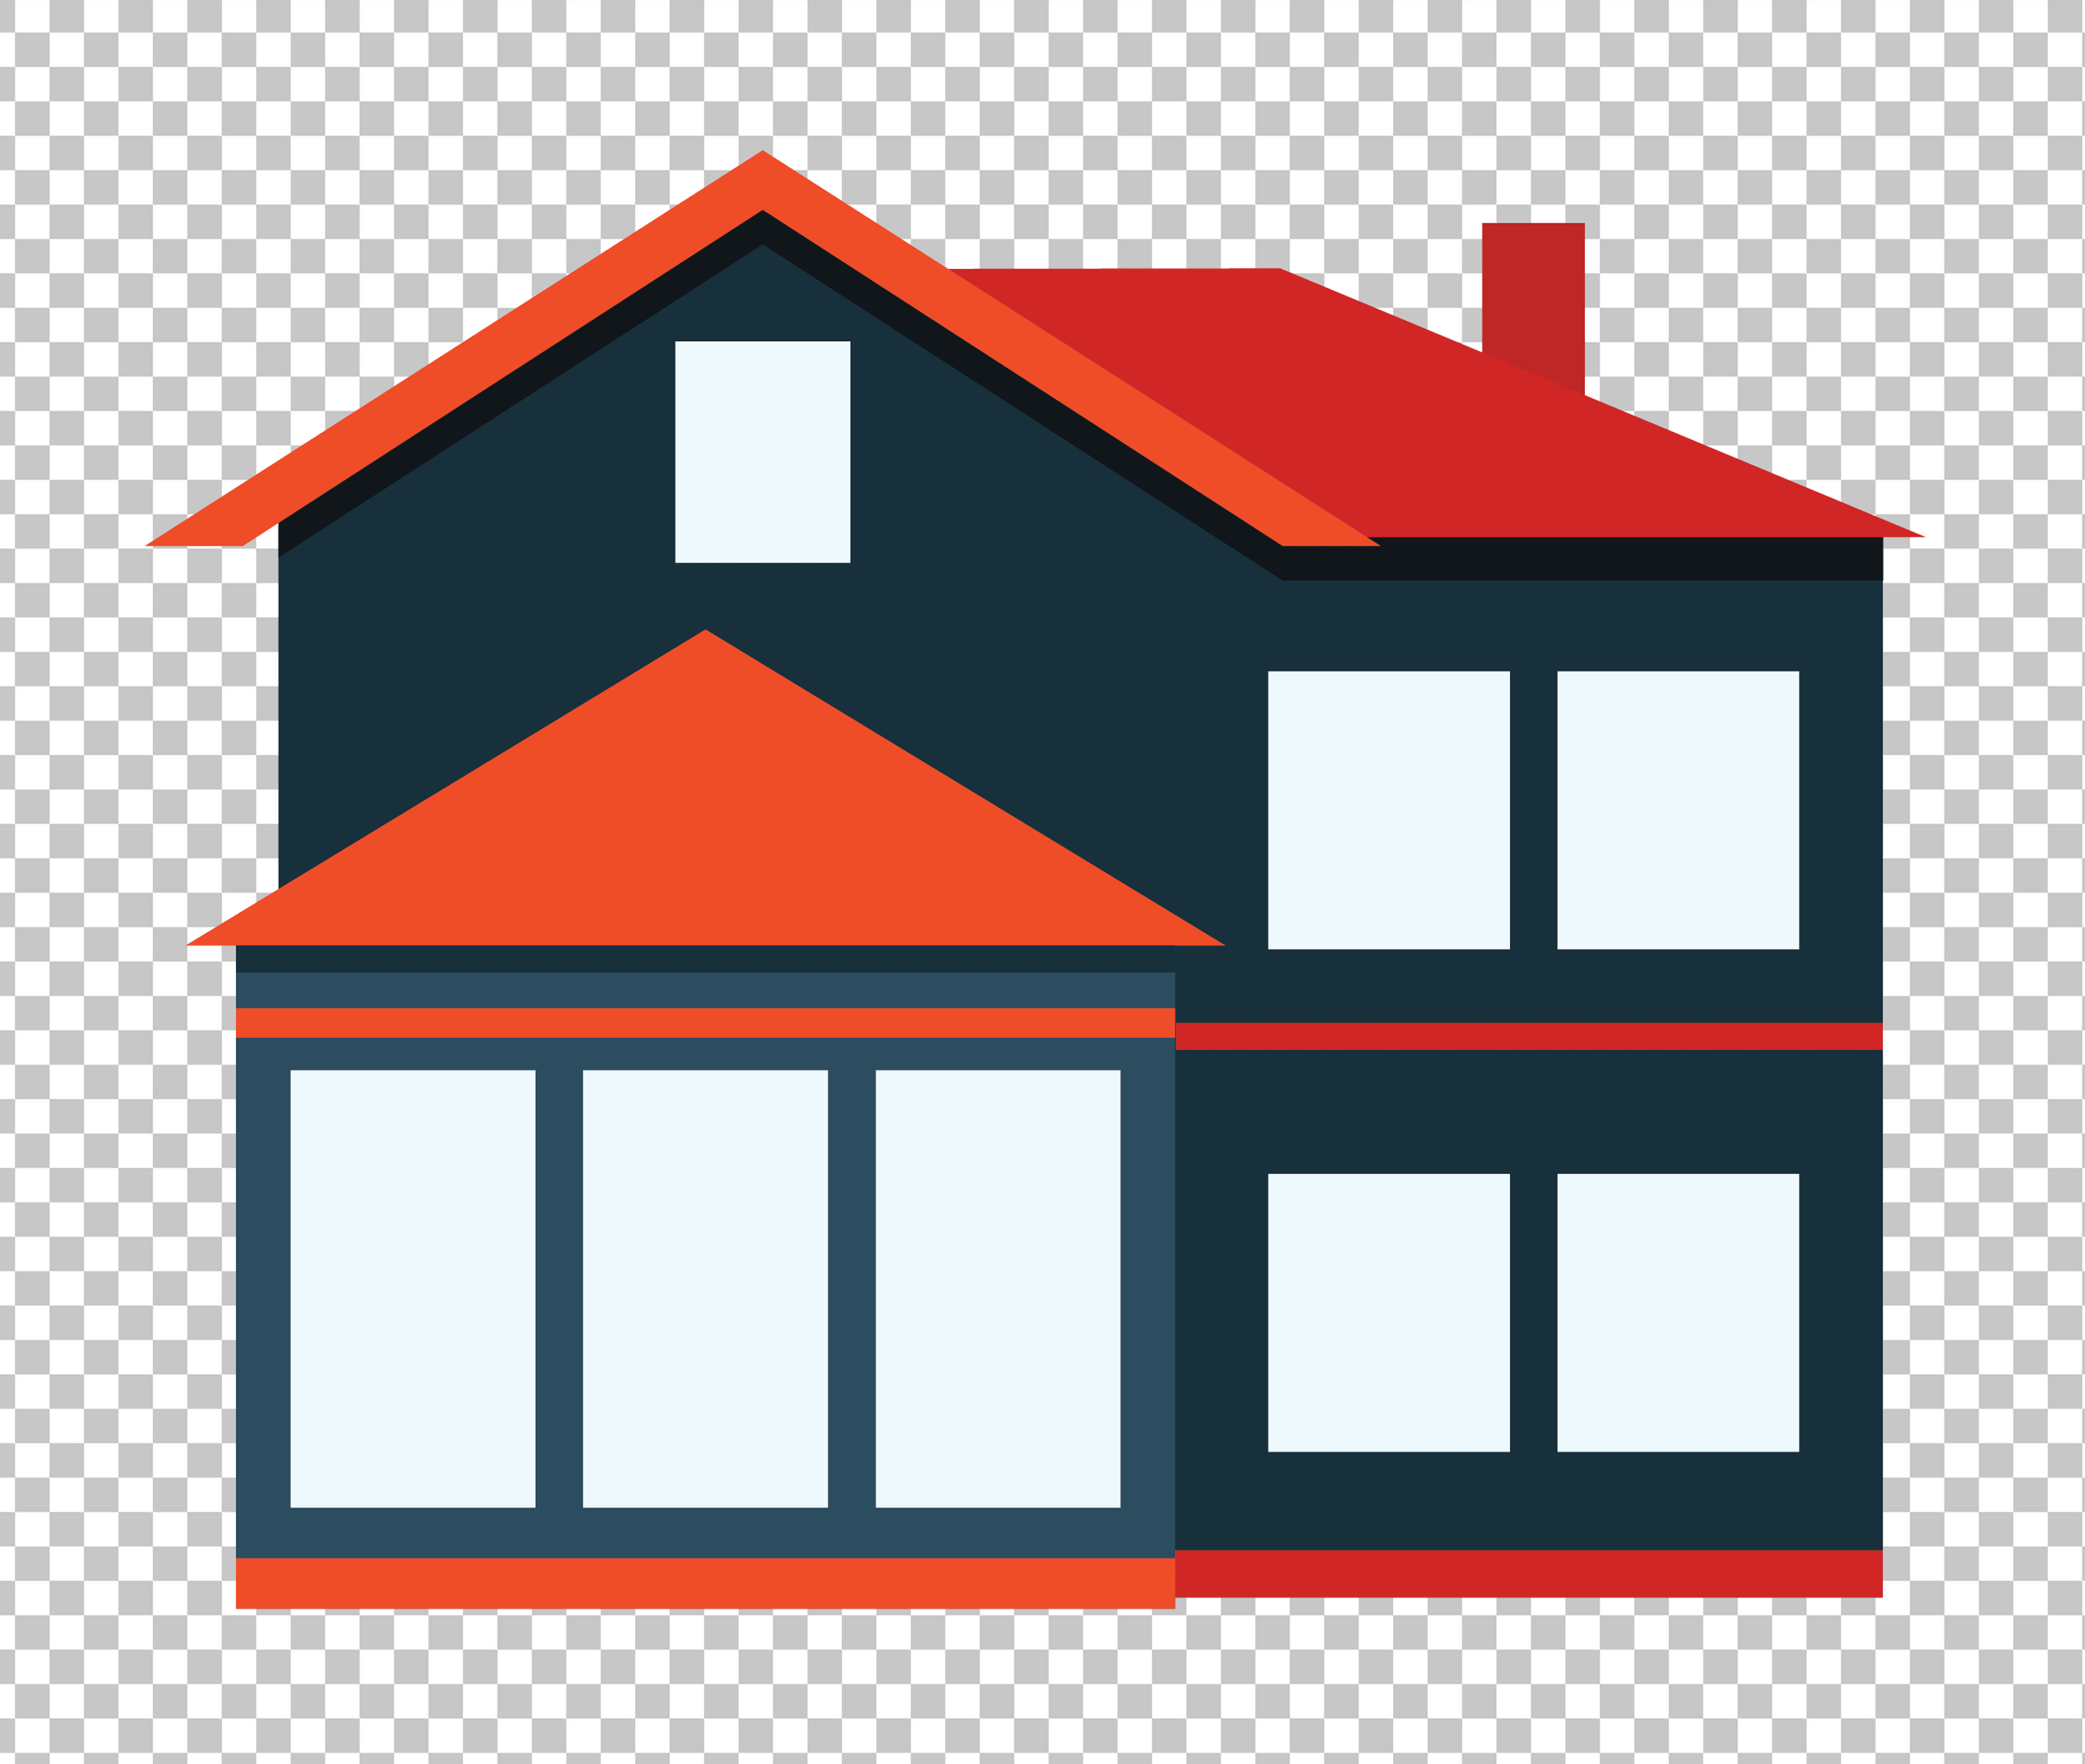 Cartoon House with Red Roof PNG Image